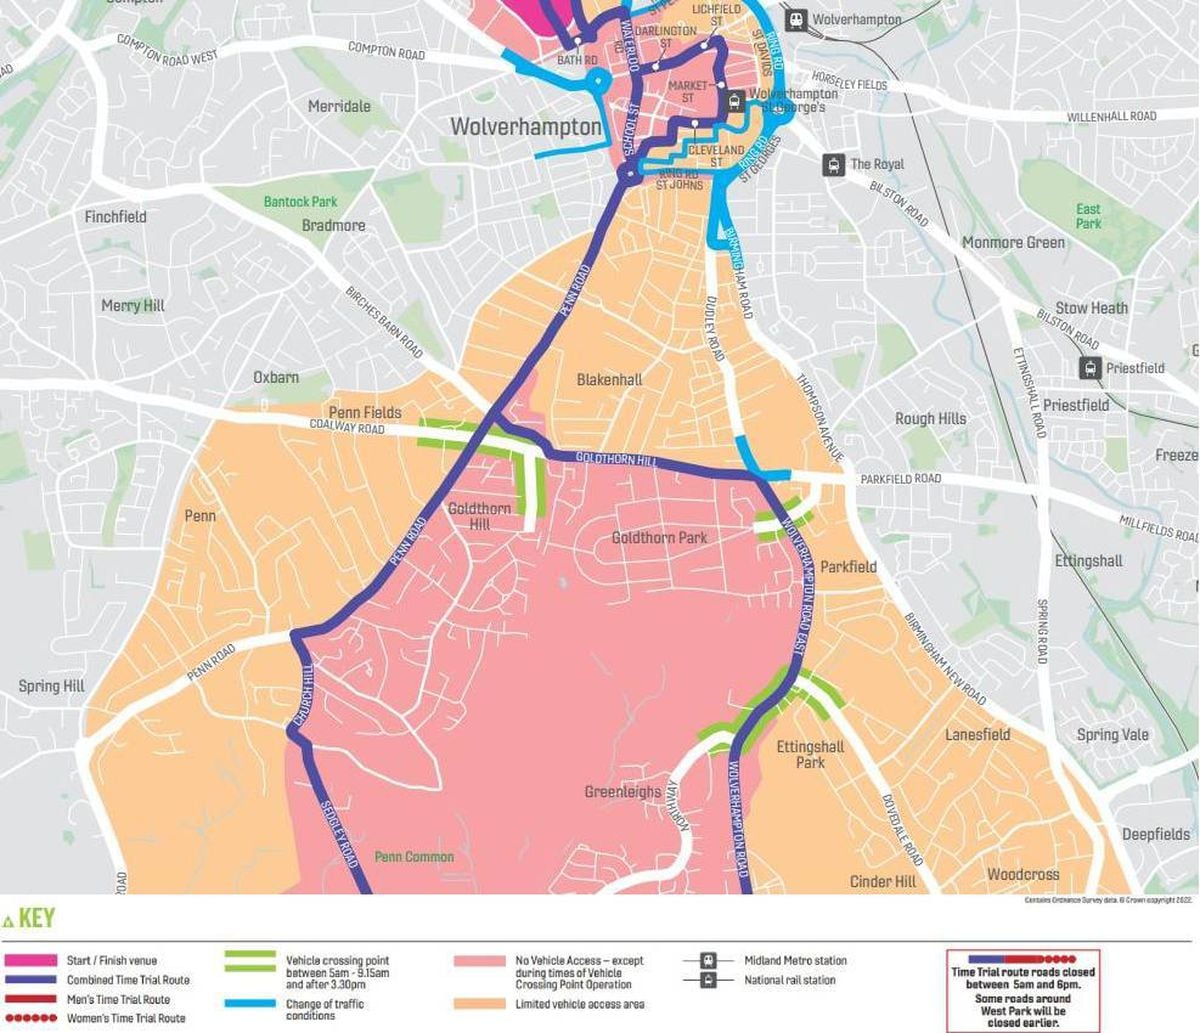 The map of road restrictions in Wolverhampton